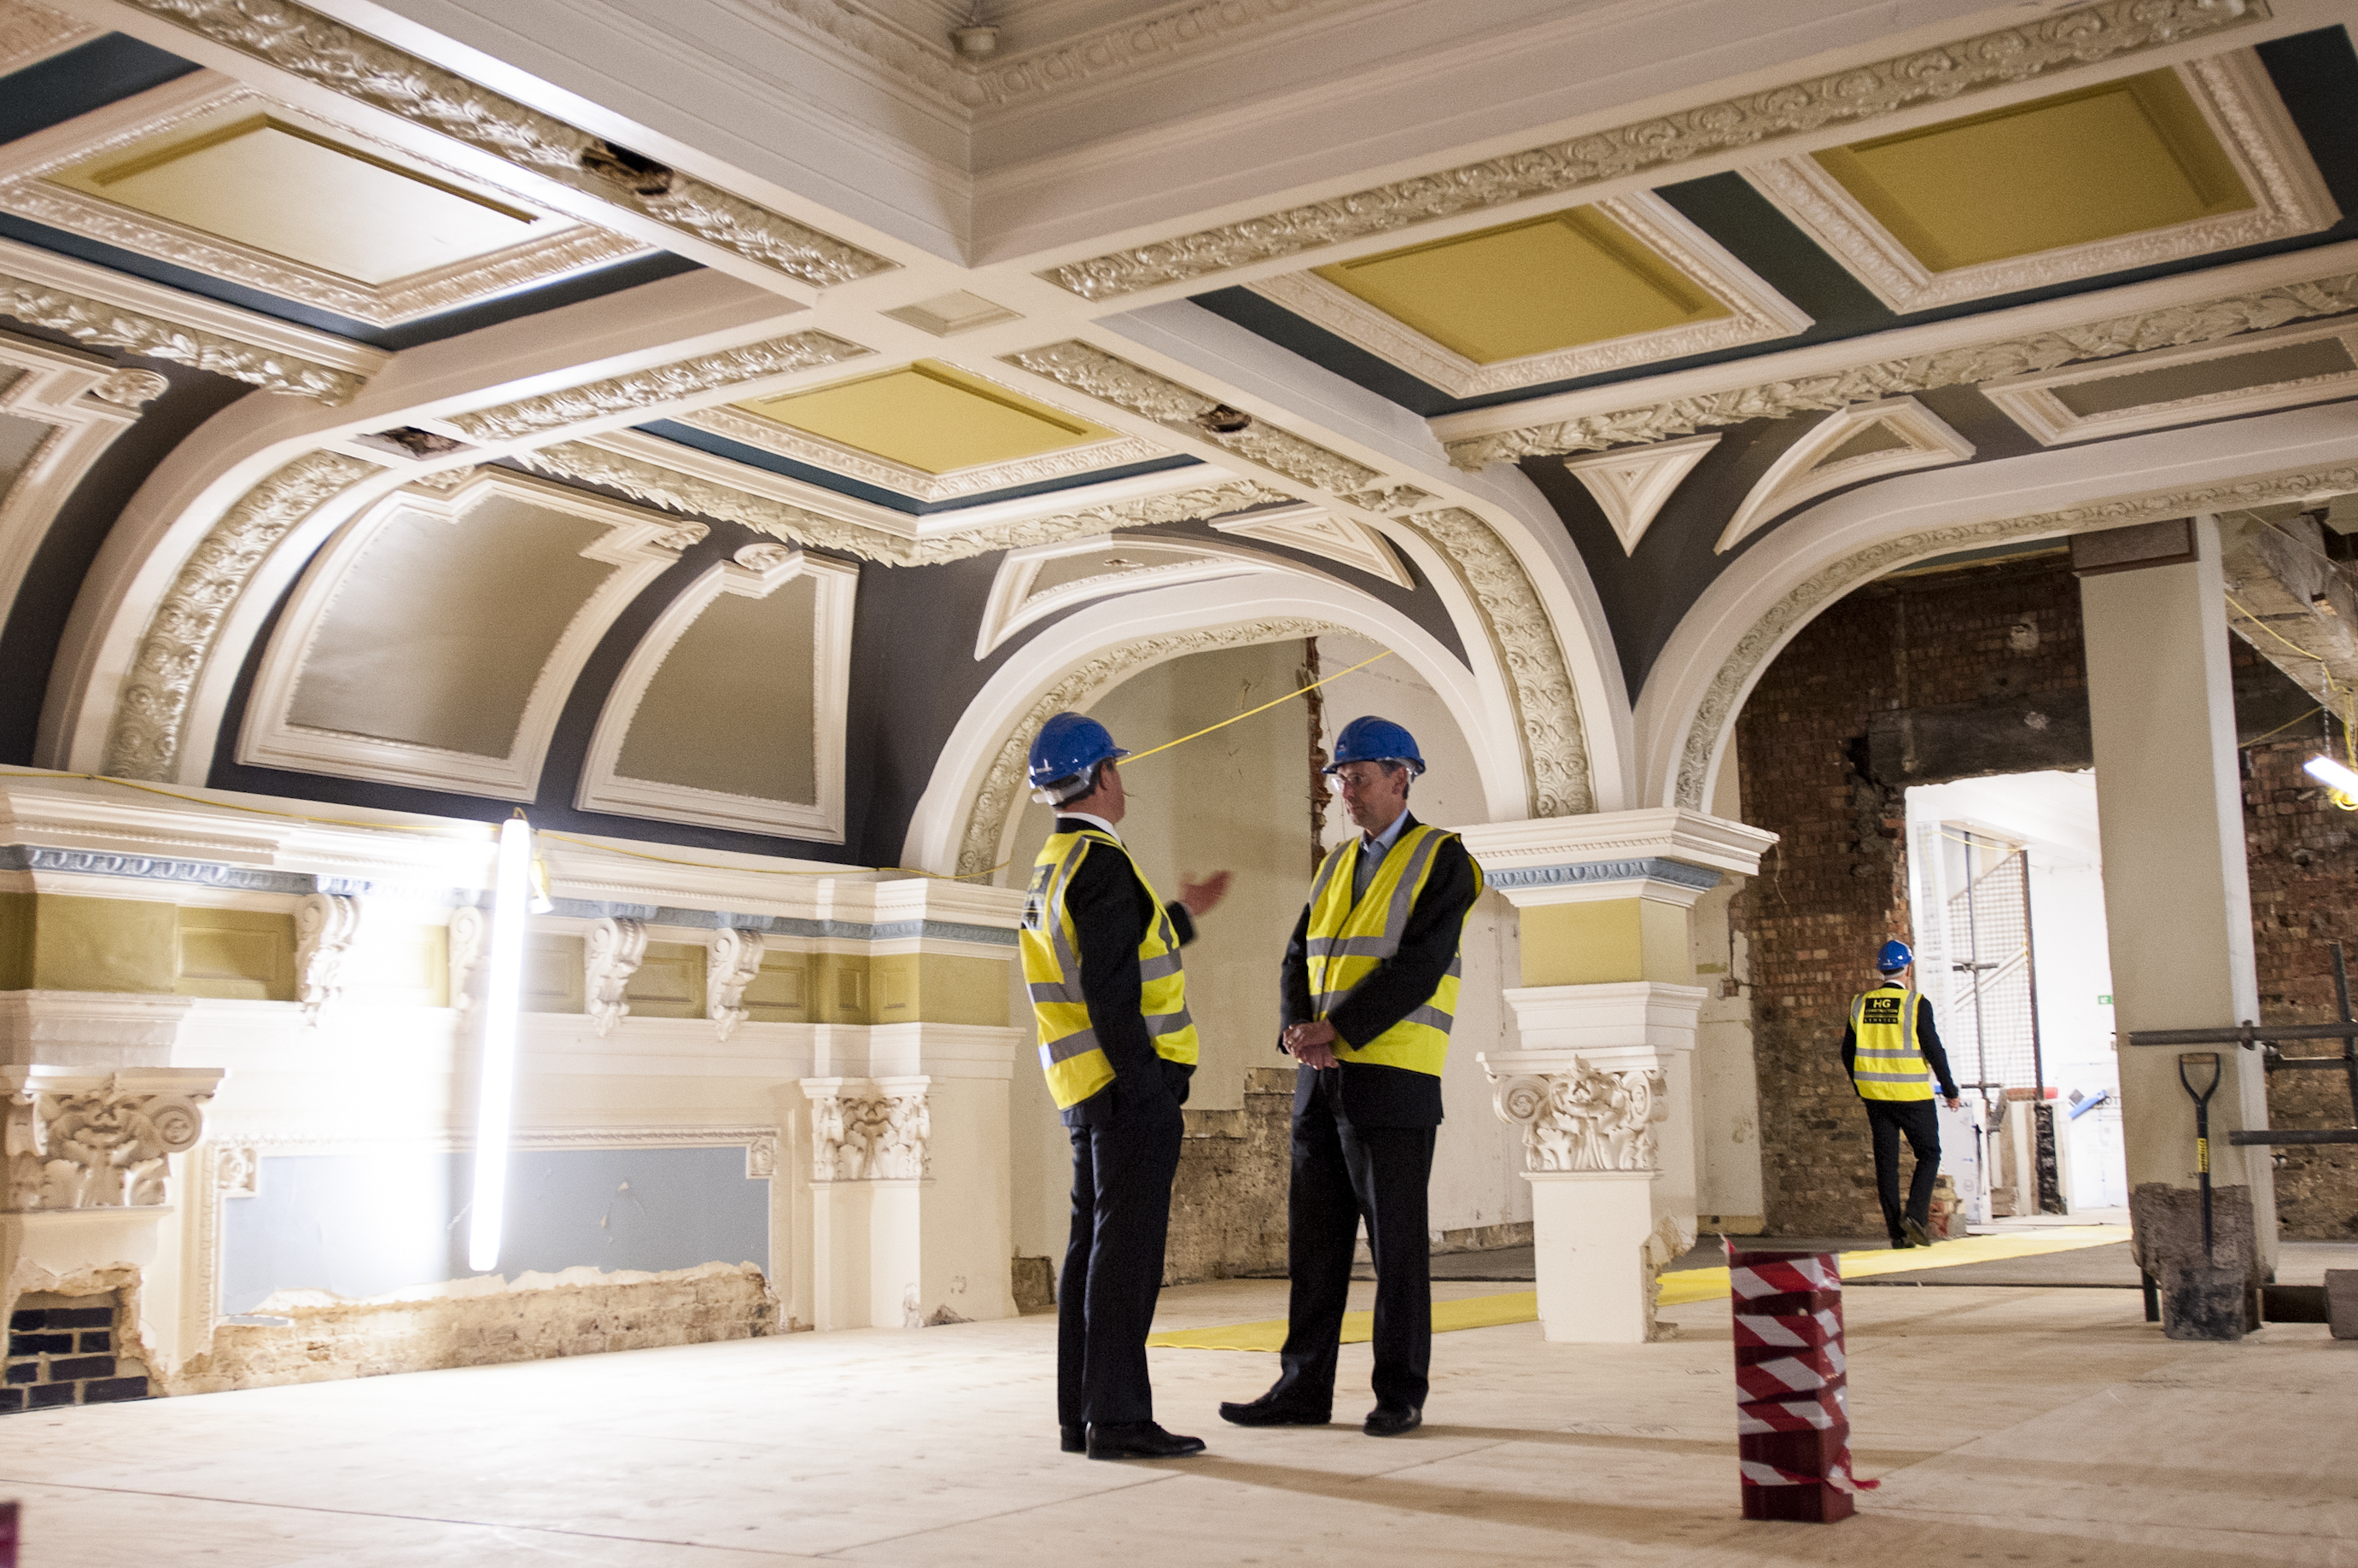 Photographs at an event showcasing the redevelopment of the former Town Hall on Peckham Road, Southwark, into student accommodation, Thursday 15th October 2015